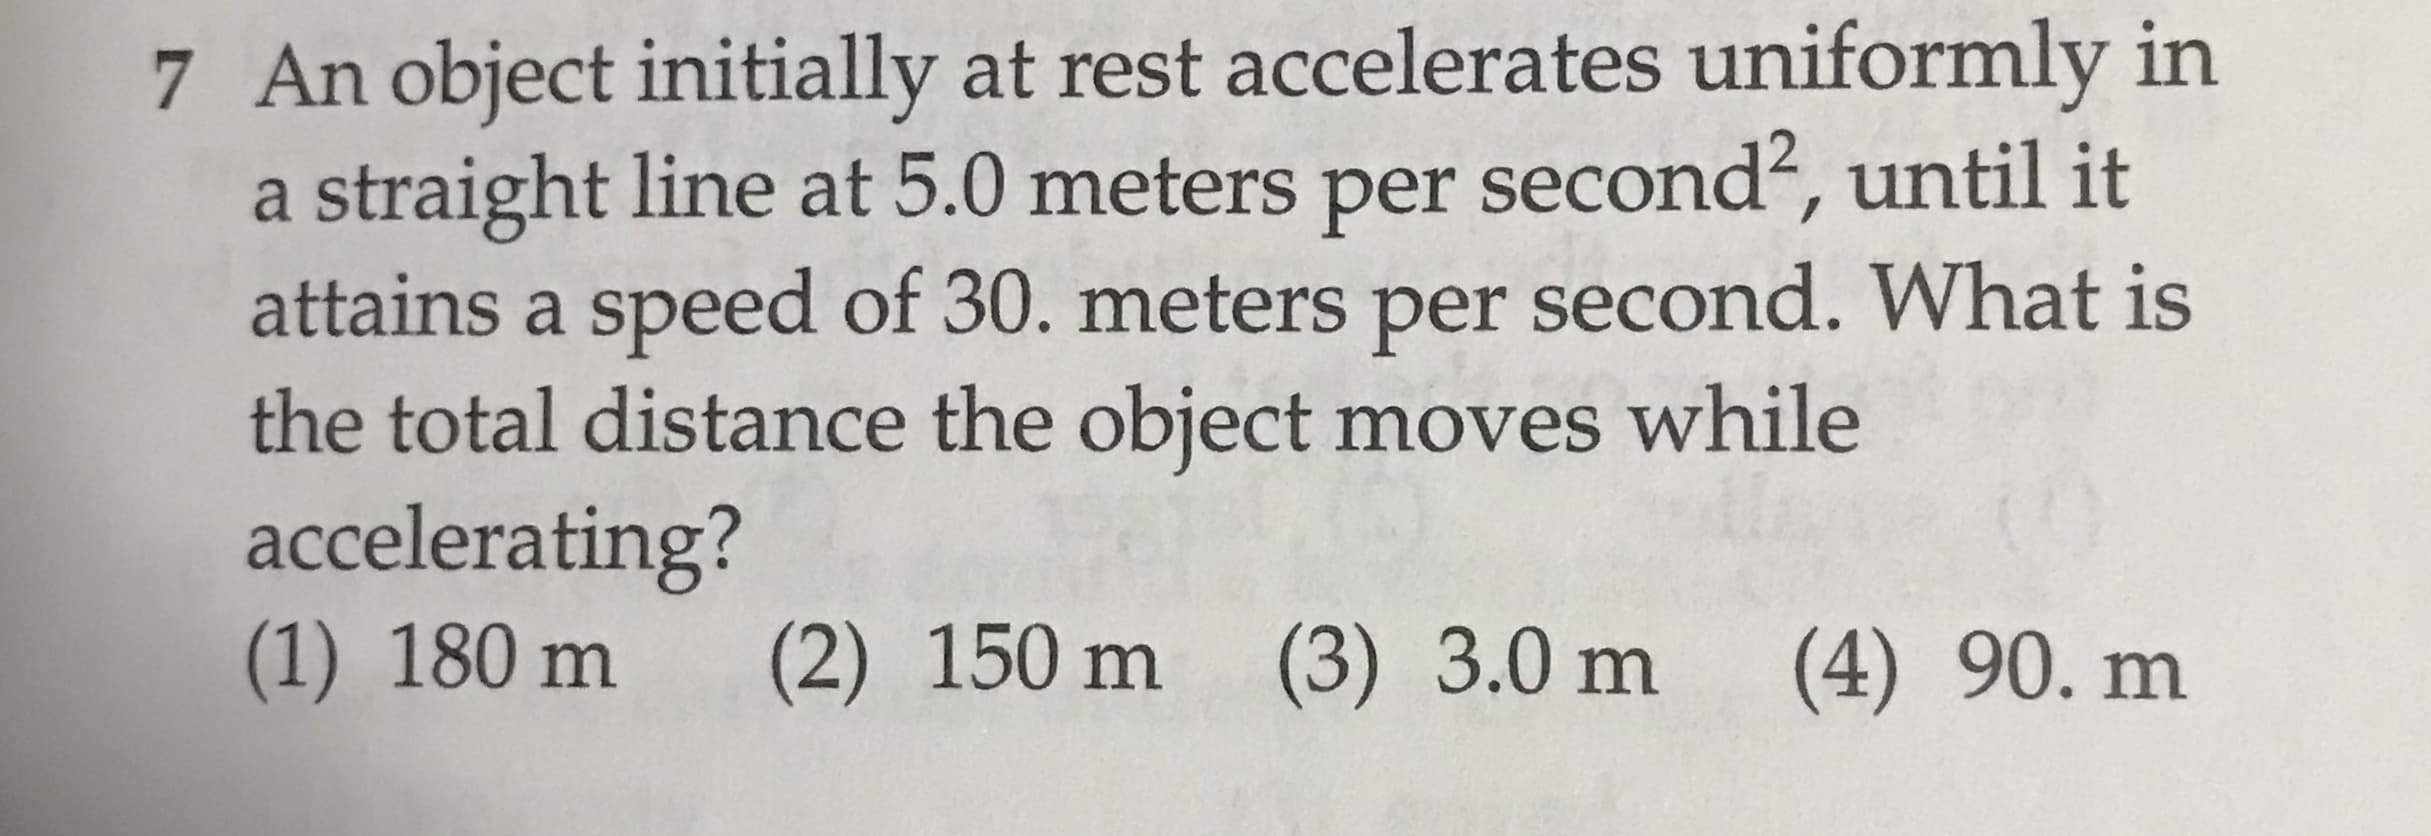 7 An object initially at rest accelerates uniformly in
a straight line at 5.0 meters per second2, until it
attains a speed of 30. meters per second. What is
the total distance the object moves while
accelerating?
(1) 180 m
(2) 150 m (3) 3.0 m
(4) 90. m
